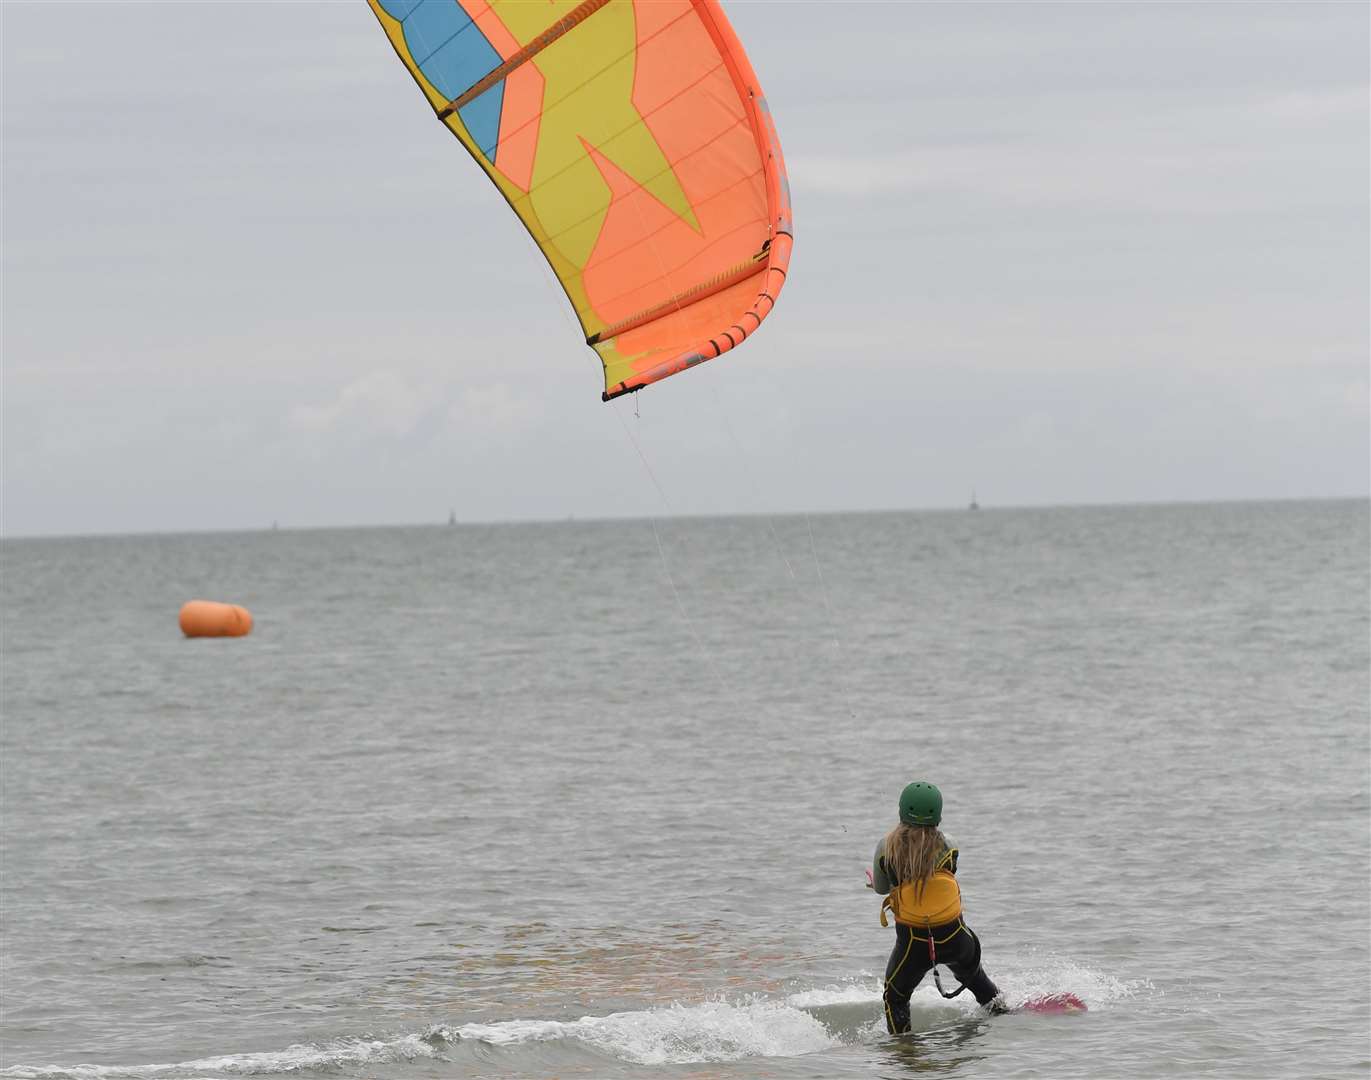 About 70 kitesurfers are taking part in the competition